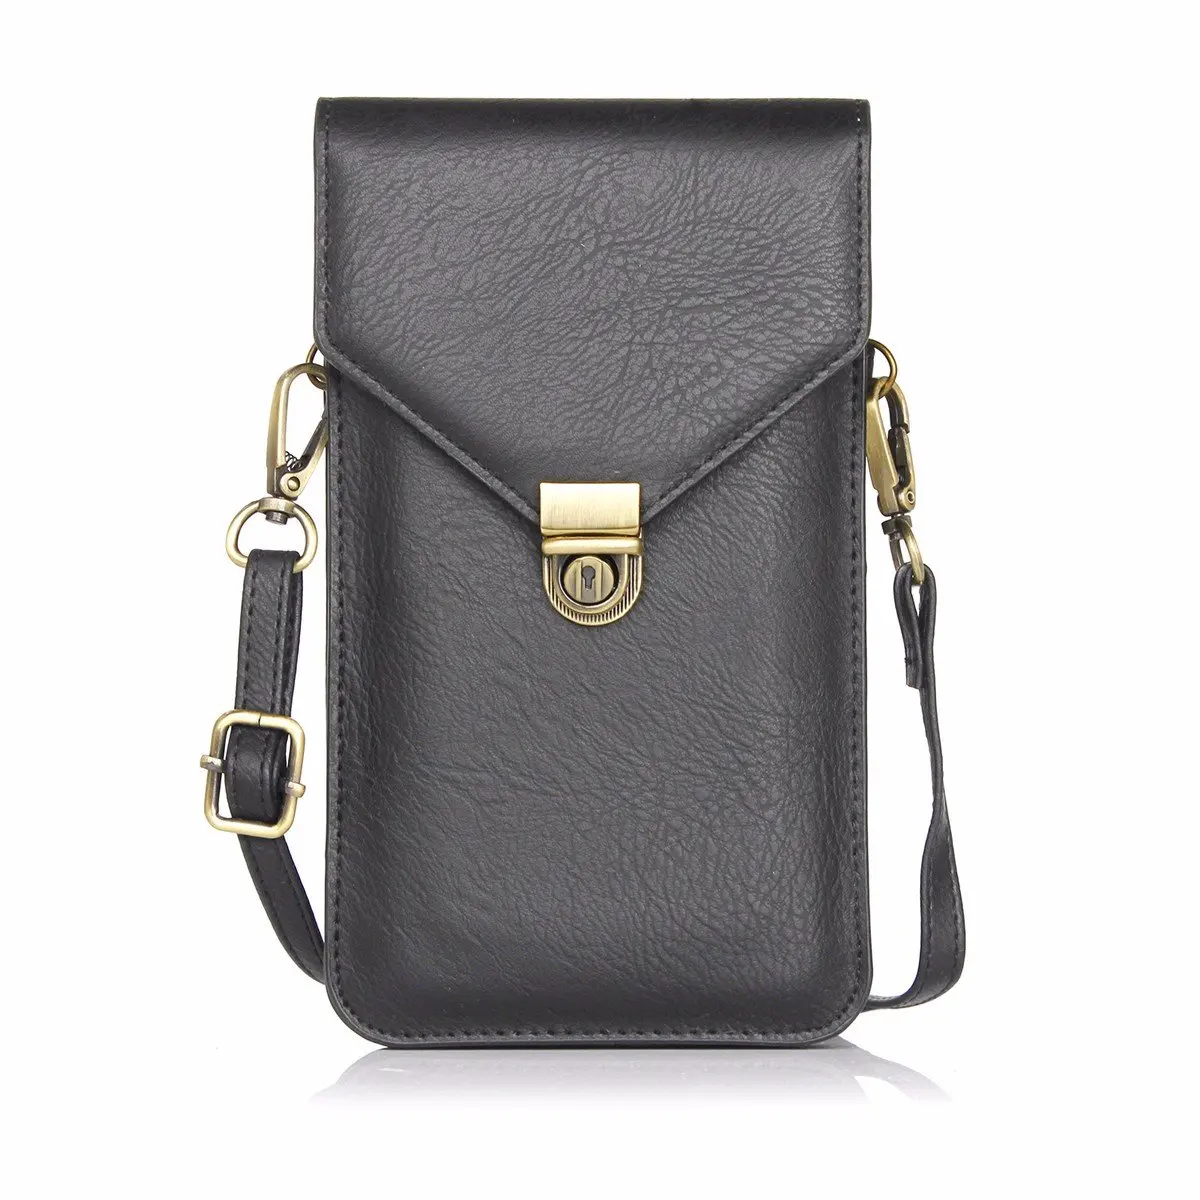 Buy Phone Shoulder Bag,Charminer PU Leather Purse Crossbody Cell Phone Bag Multipurpose Cell ...